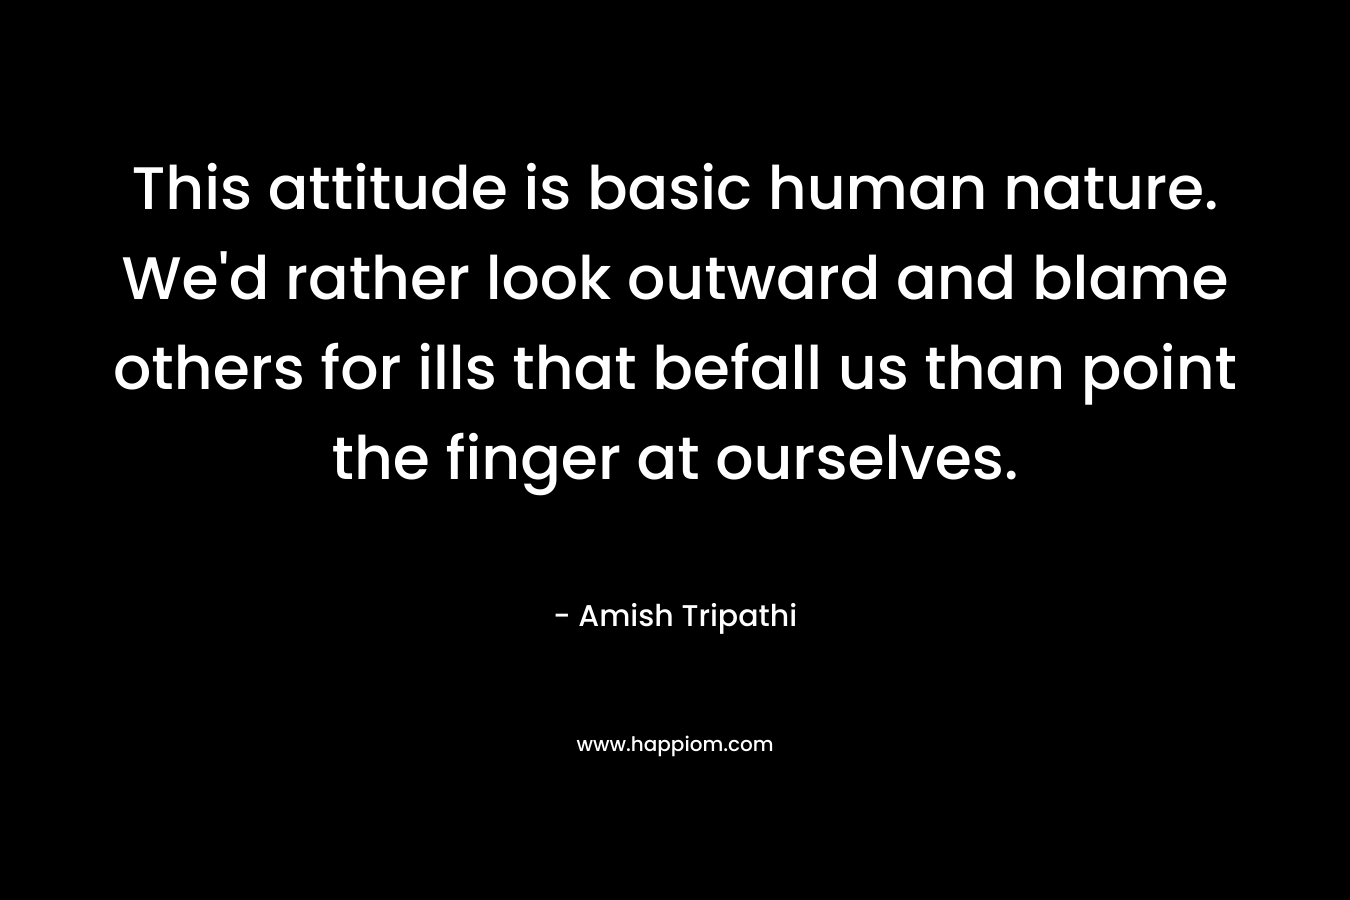 This attitude is basic human nature. We’d rather look outward and blame others for ills that befall us than point the finger at ourselves. – Amish Tripathi